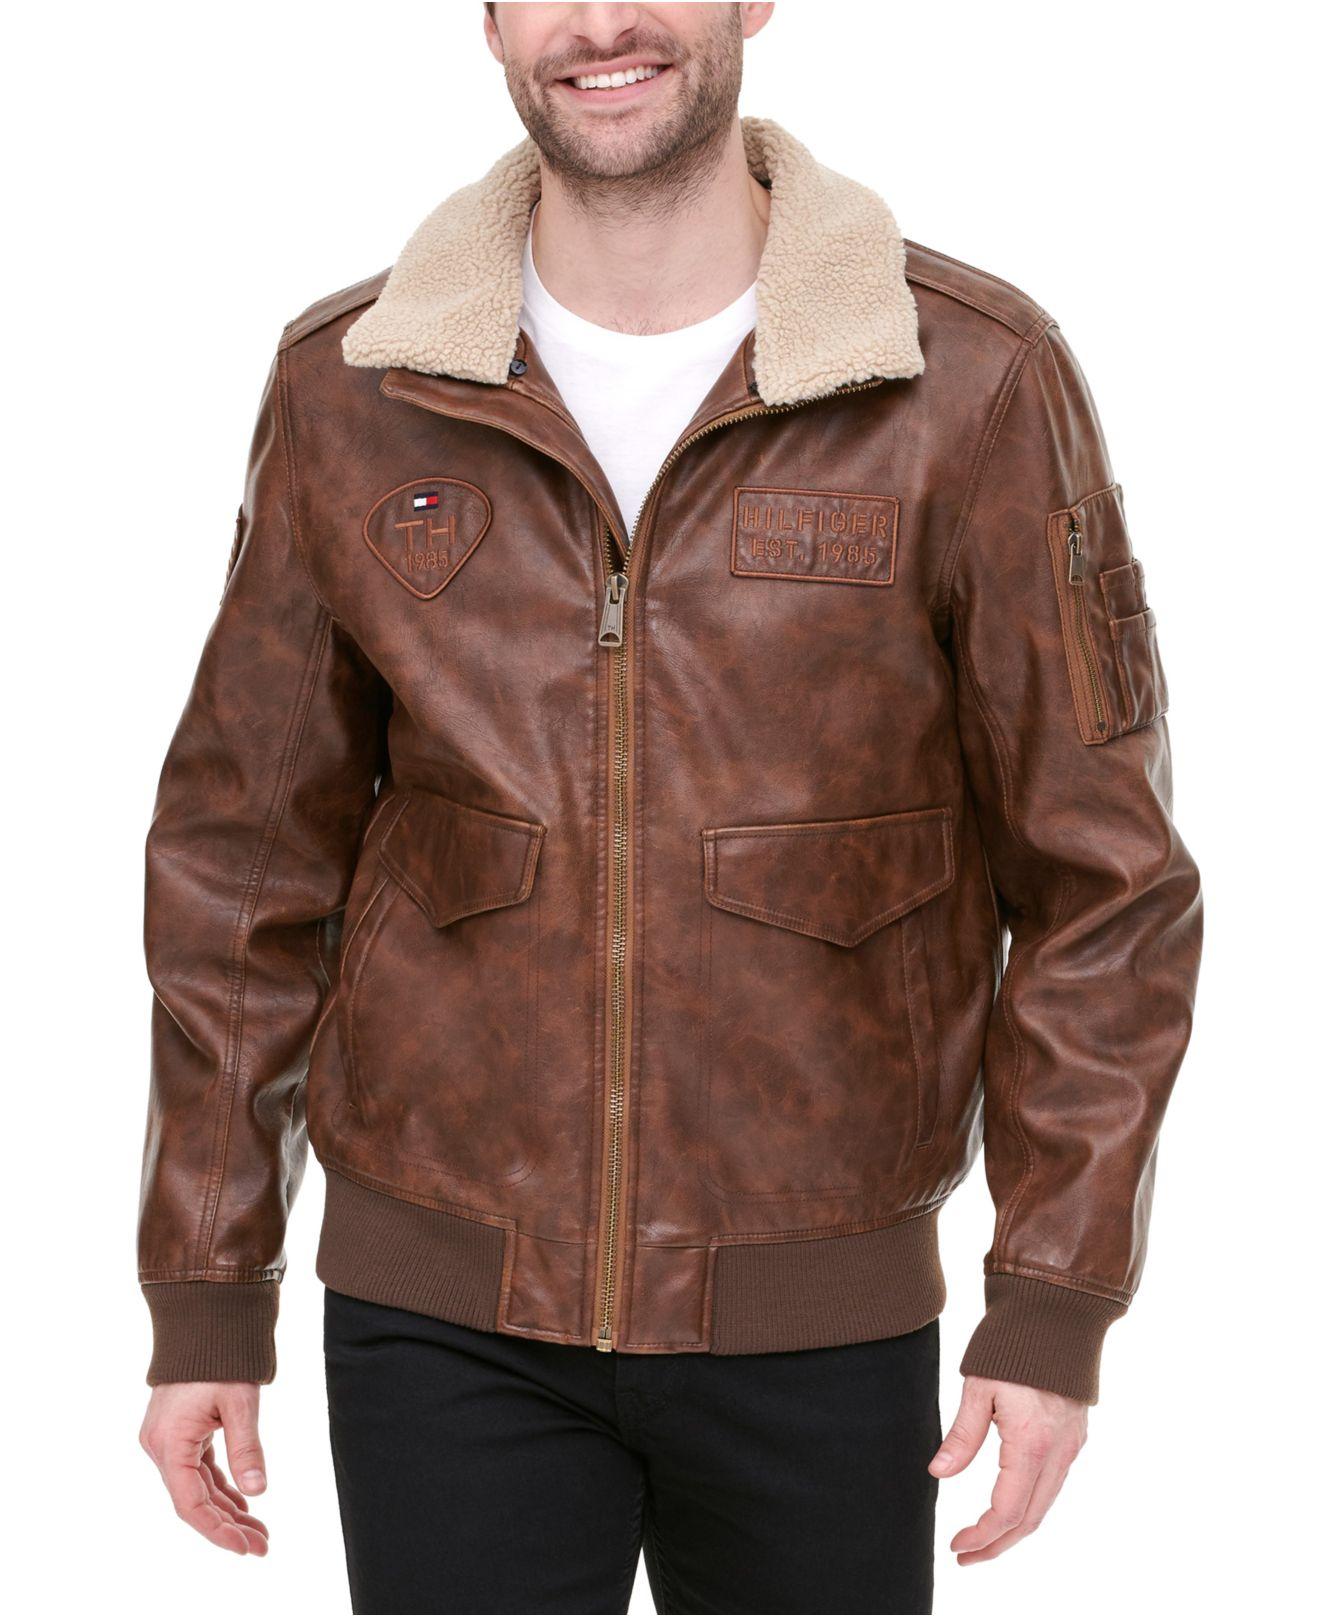 Tommy Hilfiger Top Gun Faux Leather Aviator Bomber Jacket, Created For ...